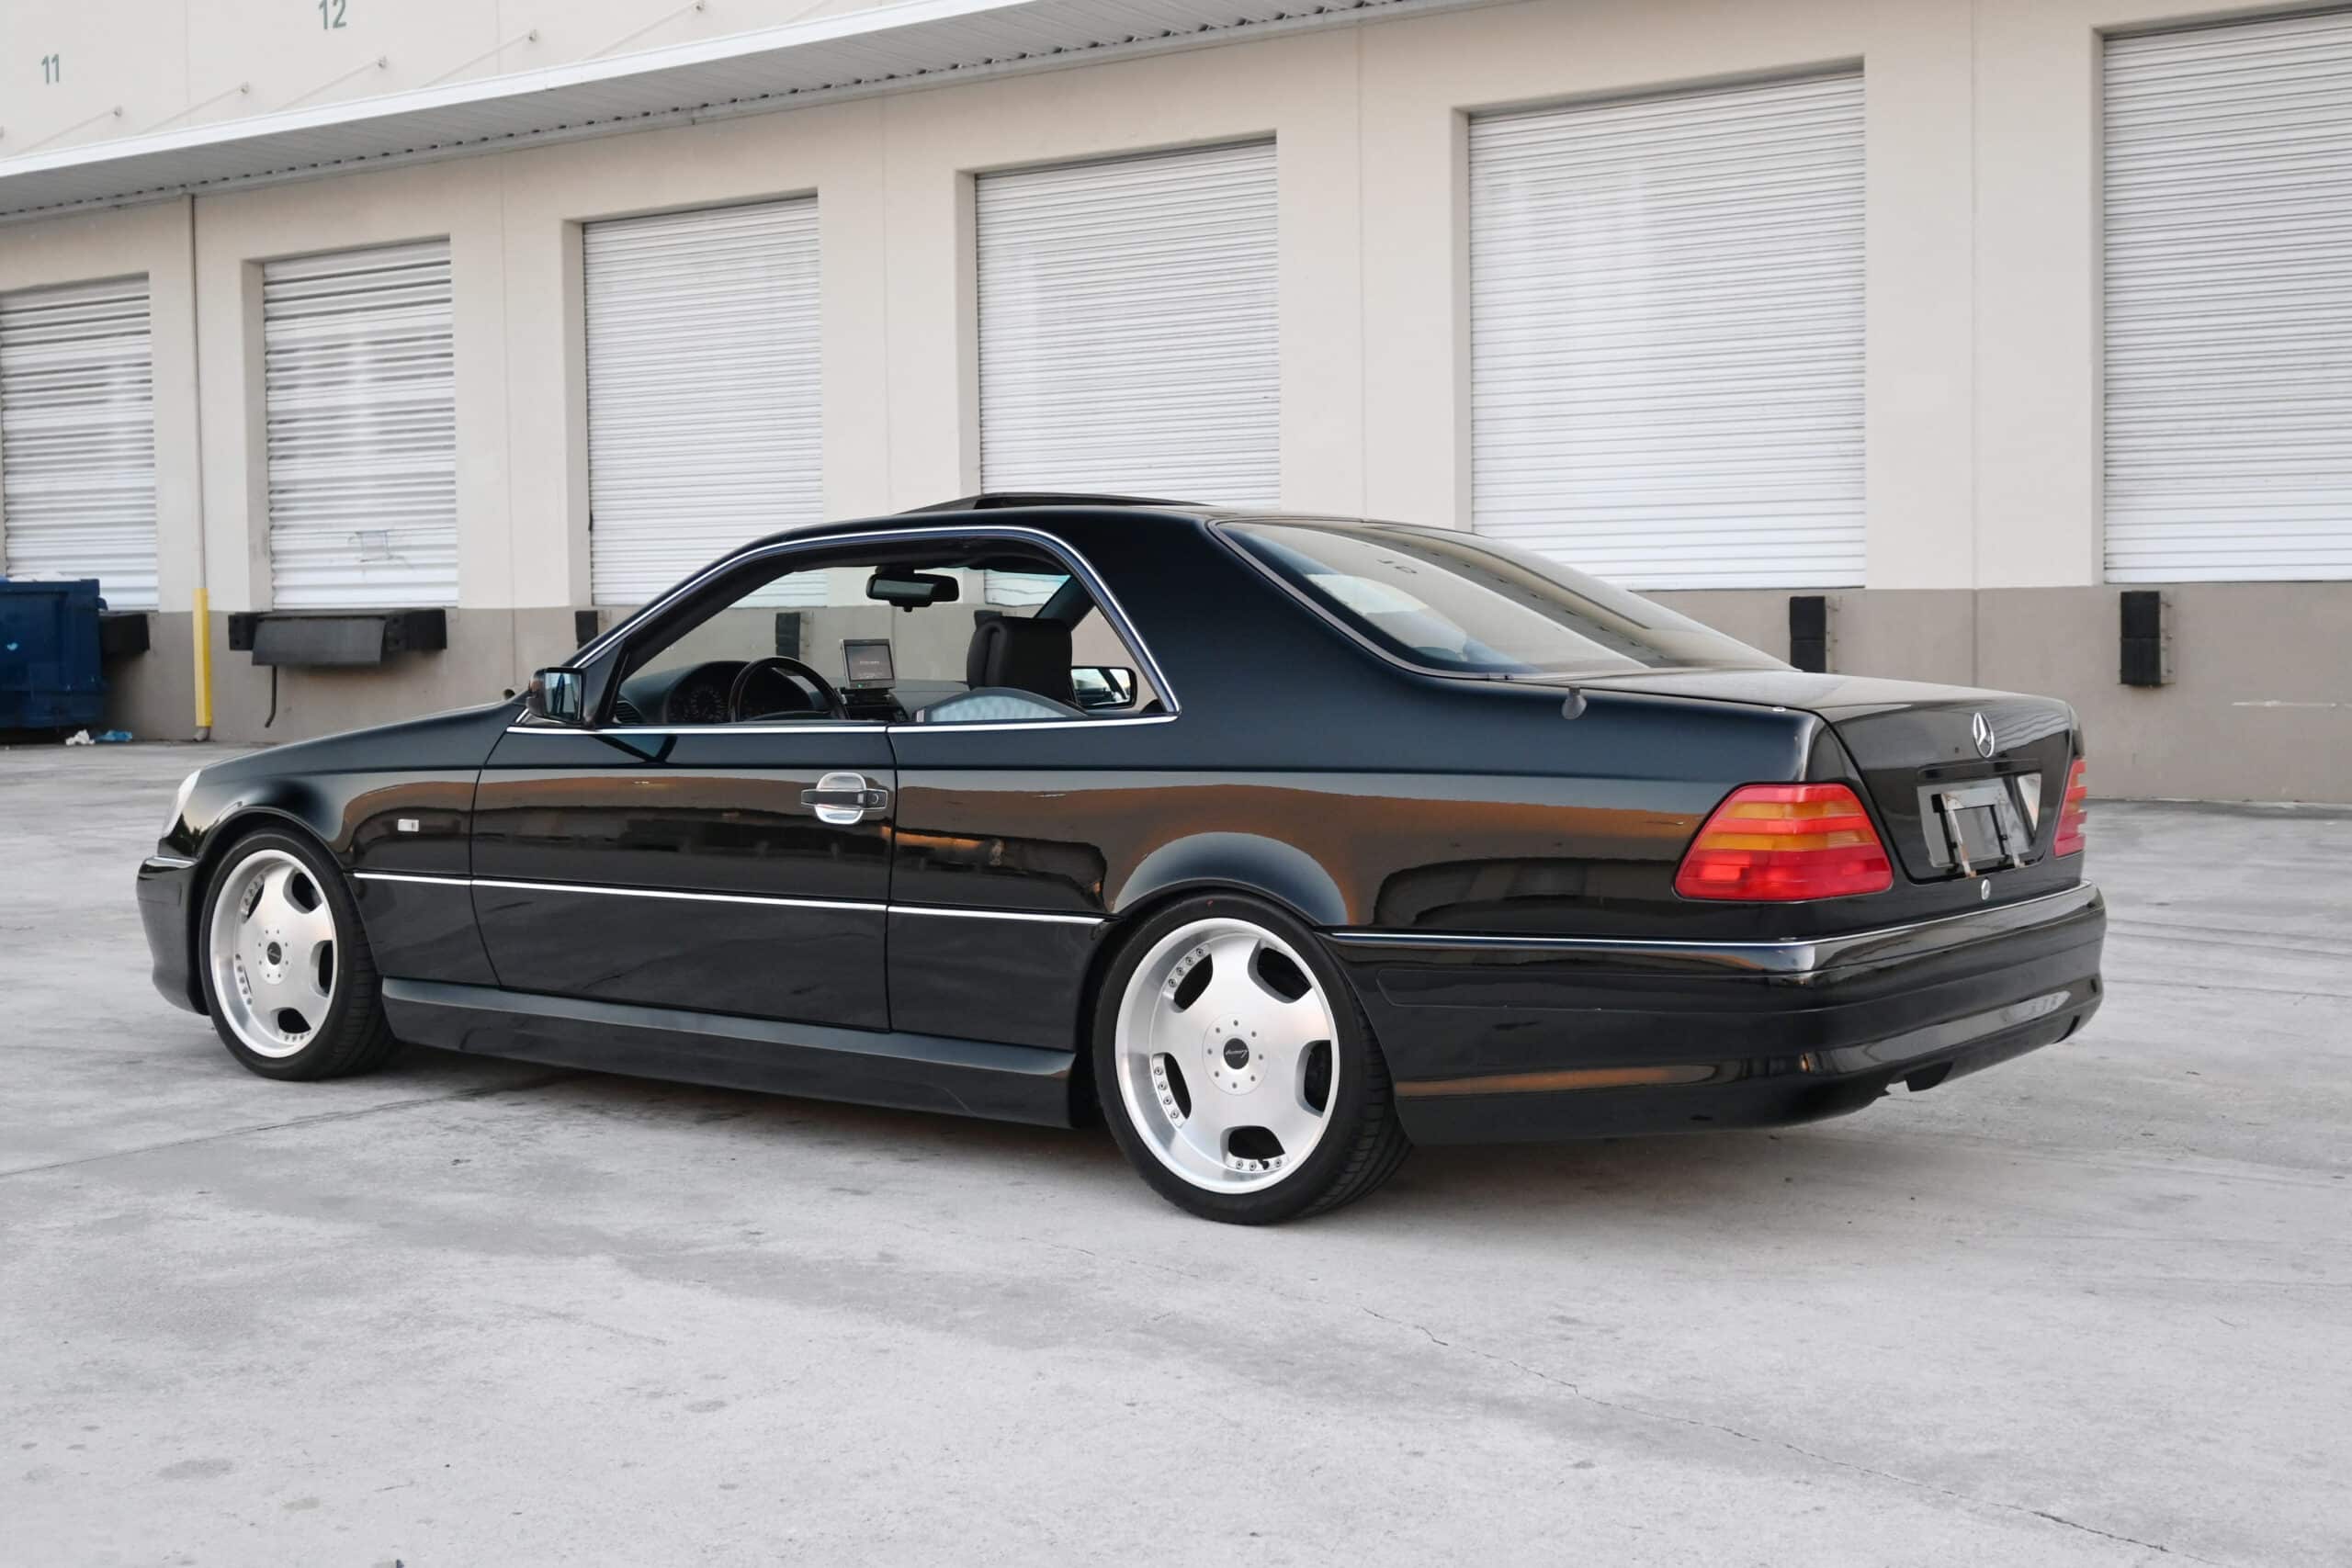 1995 Mercedes Benz S600 Coupe, Wald edition, one reported owner, 47K miles, just fully serviced, ice cold A/C, fast and luxurious, 5-speed Gtronic